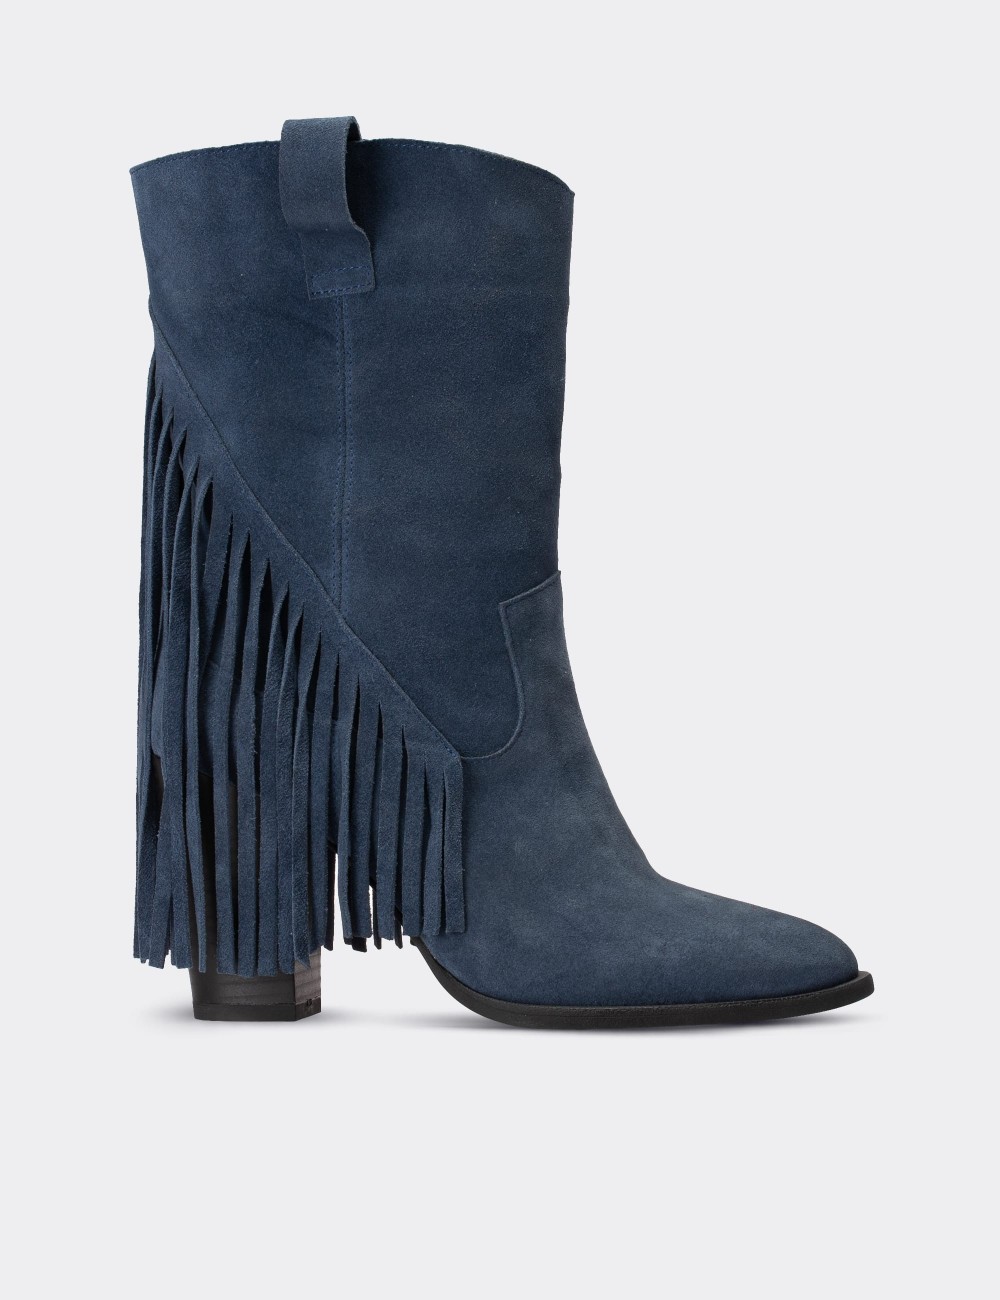 Blue Suede Leather Boots - E4467ZMVIC01